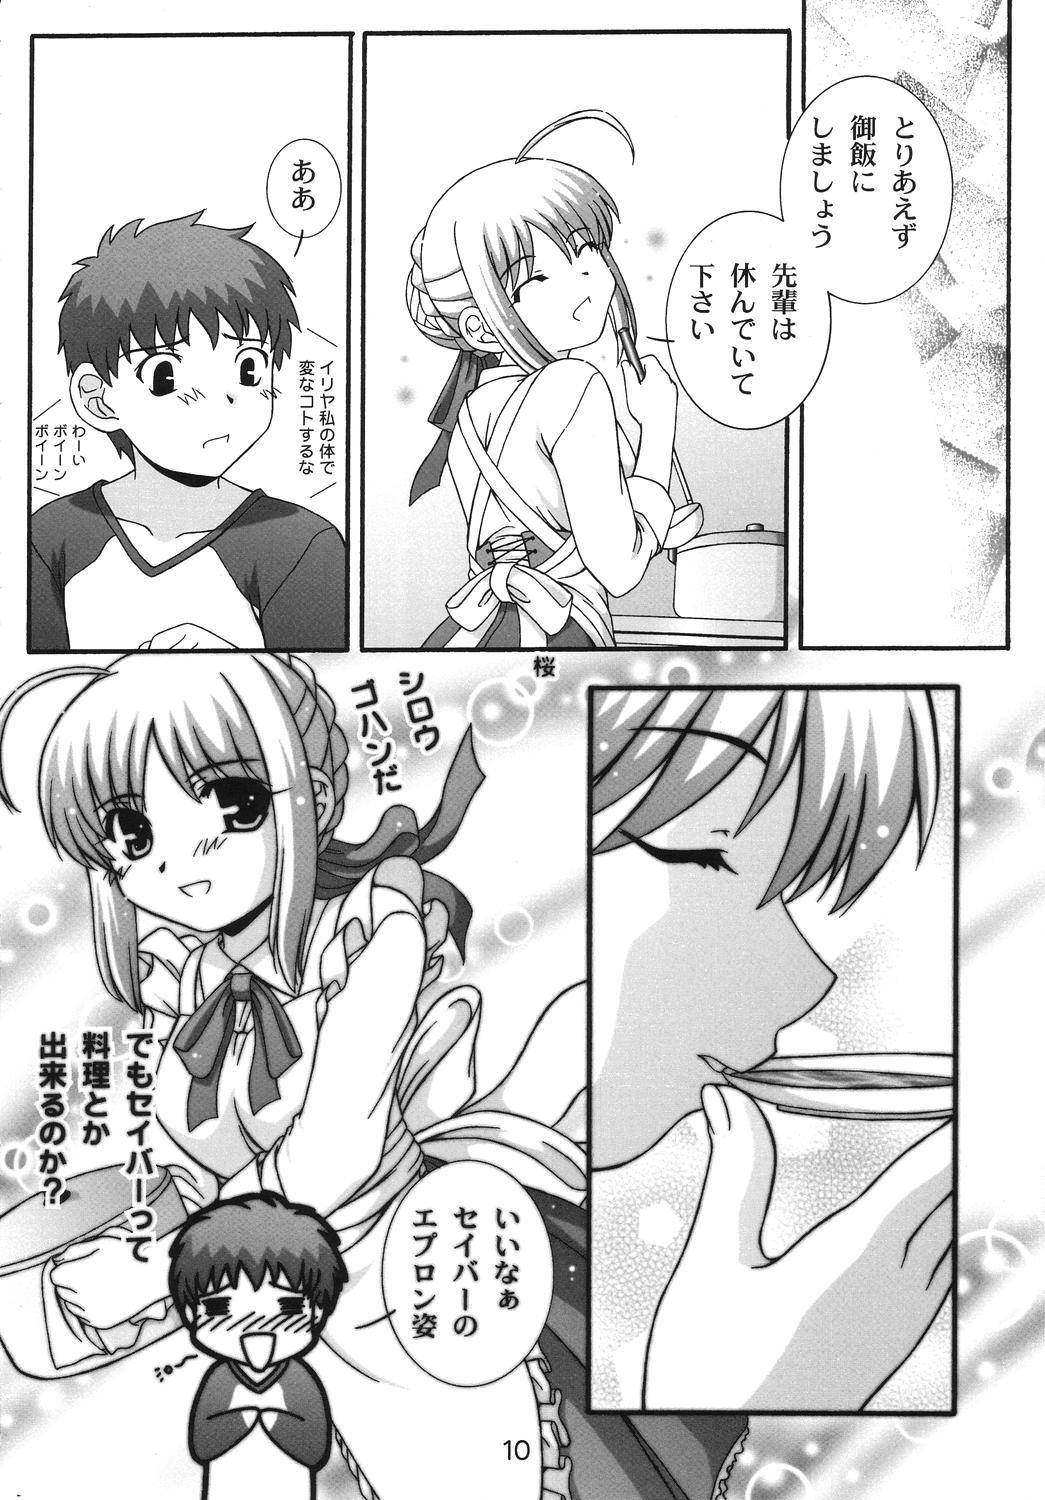 Chile SECRET FILE NEXT 11 - Fate is capricious - Fate stay night Hidden - Page 9